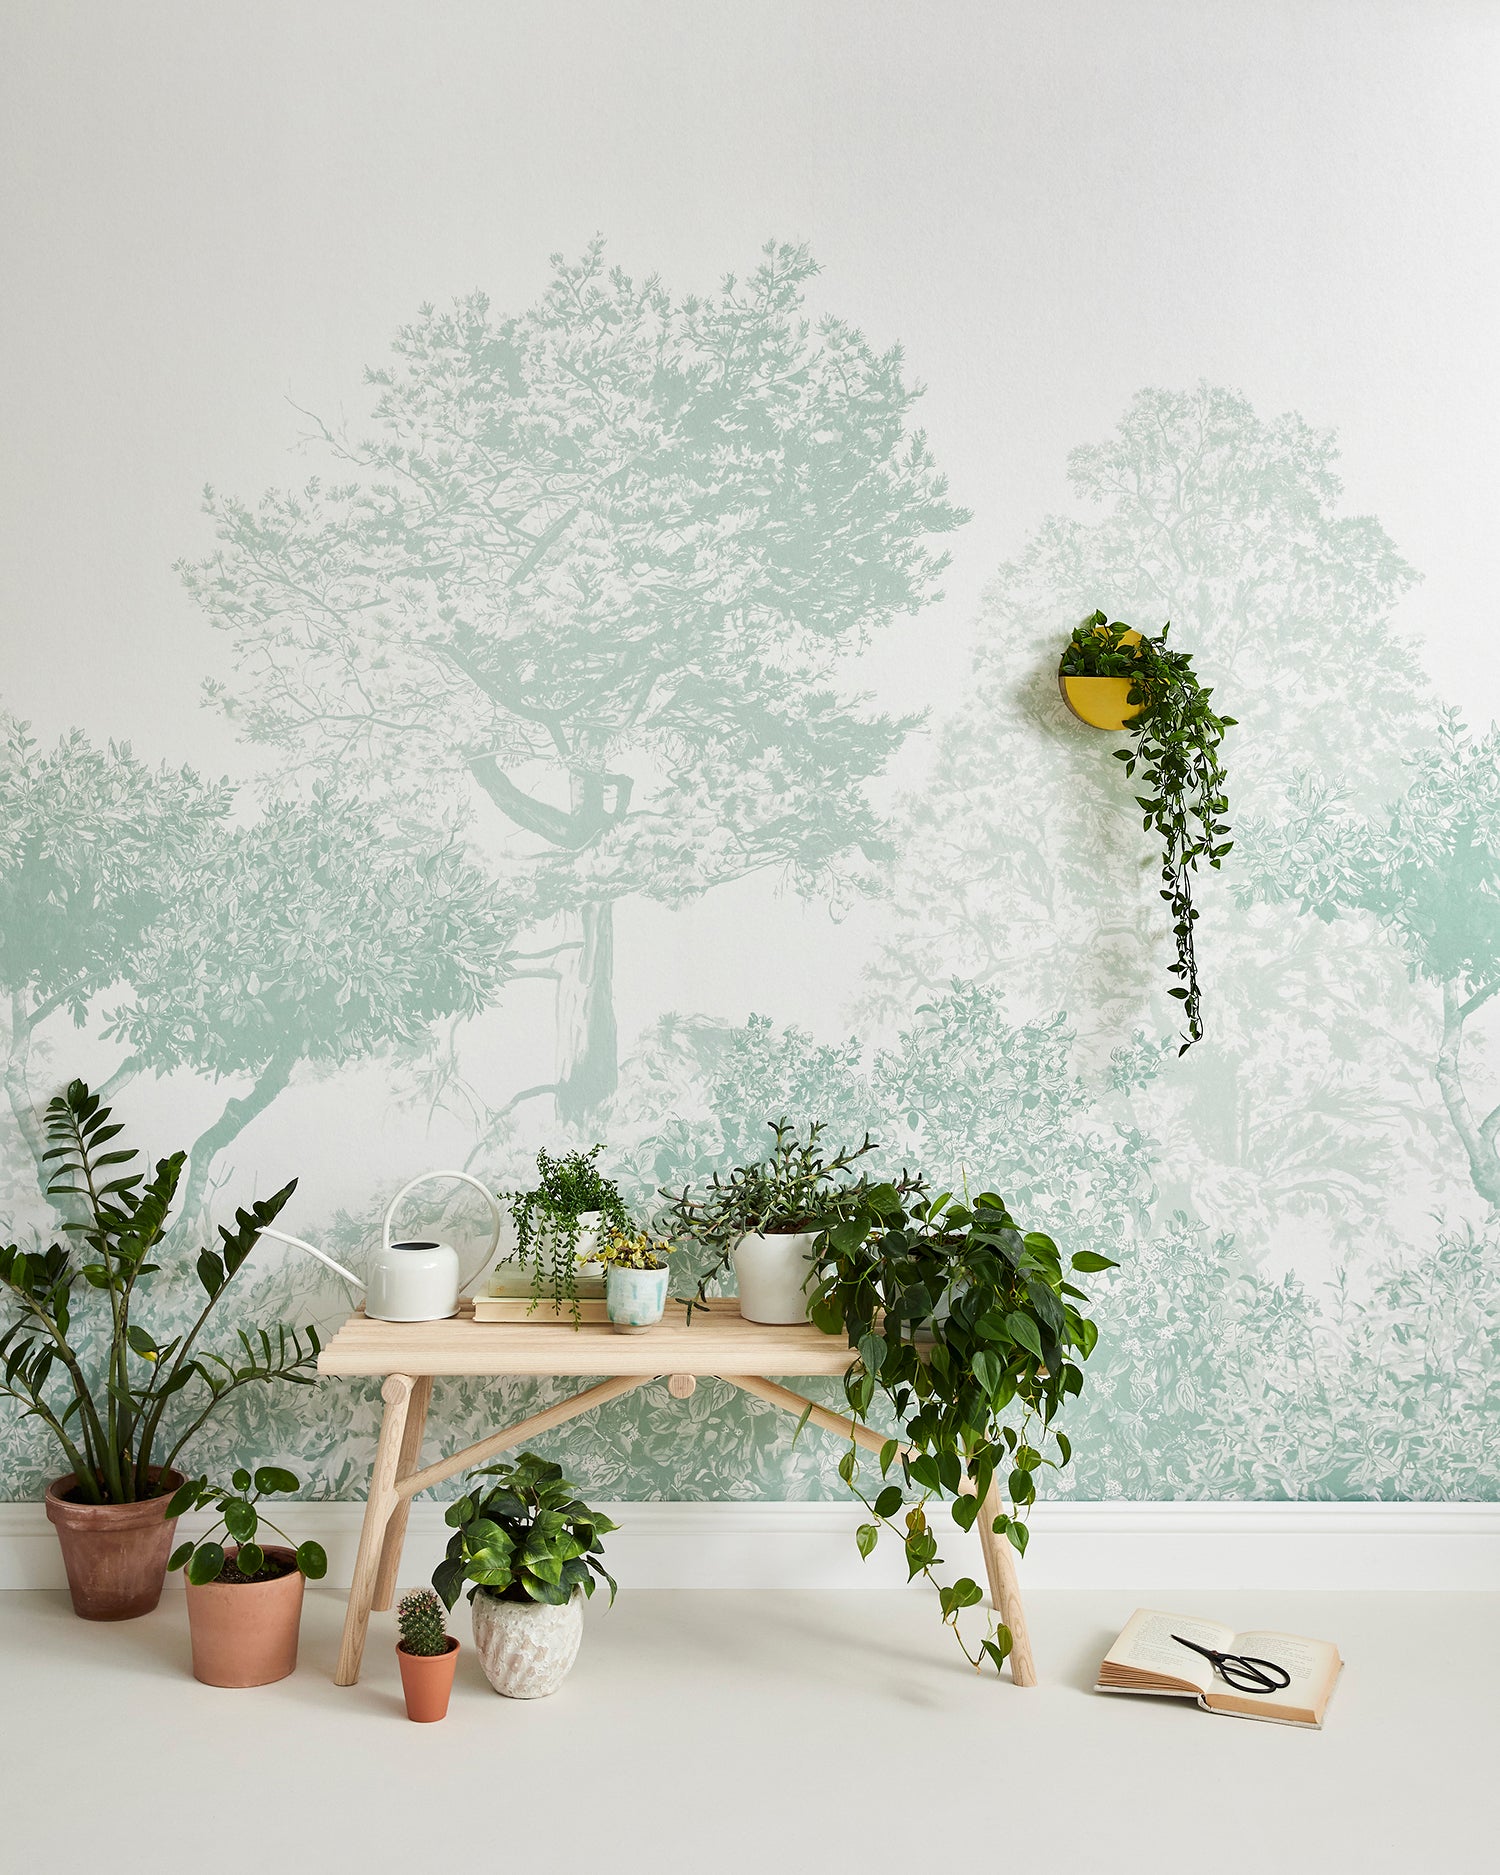 New Wallpaper Colours: Hua Trees in Dusty Green & Blue